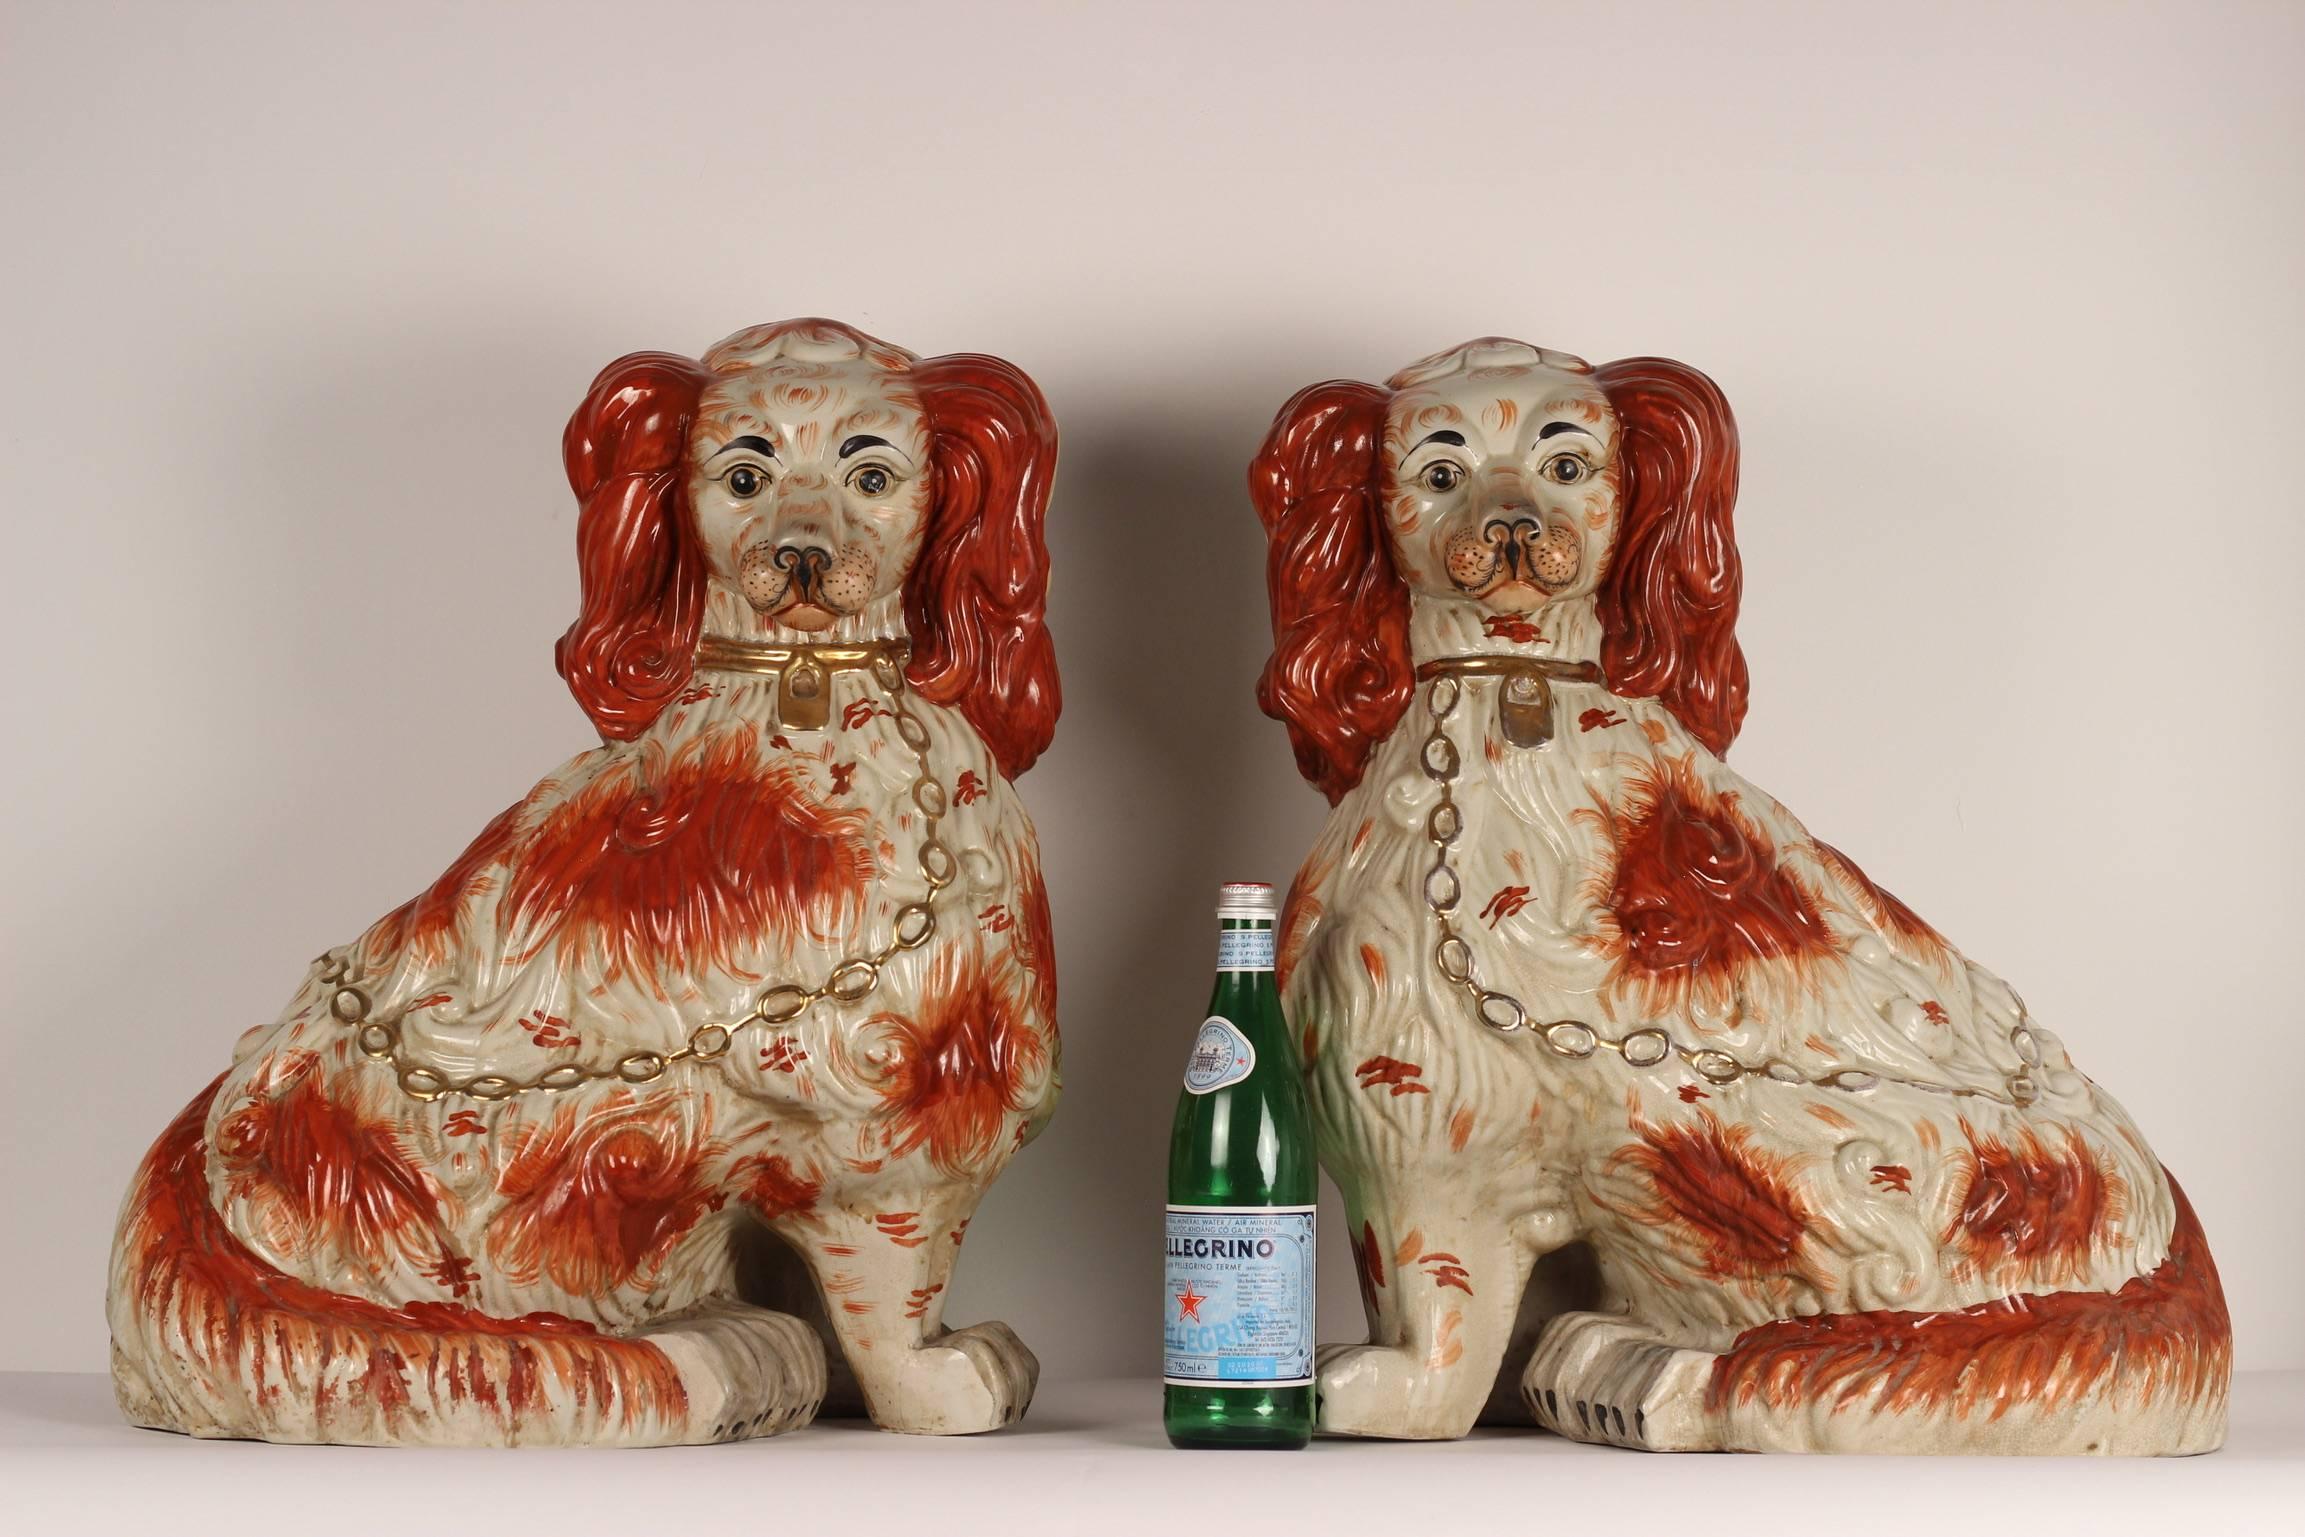 19th Century A Pair of Large English Porcelain Cavalier King Charles Spaniels Staffordshire